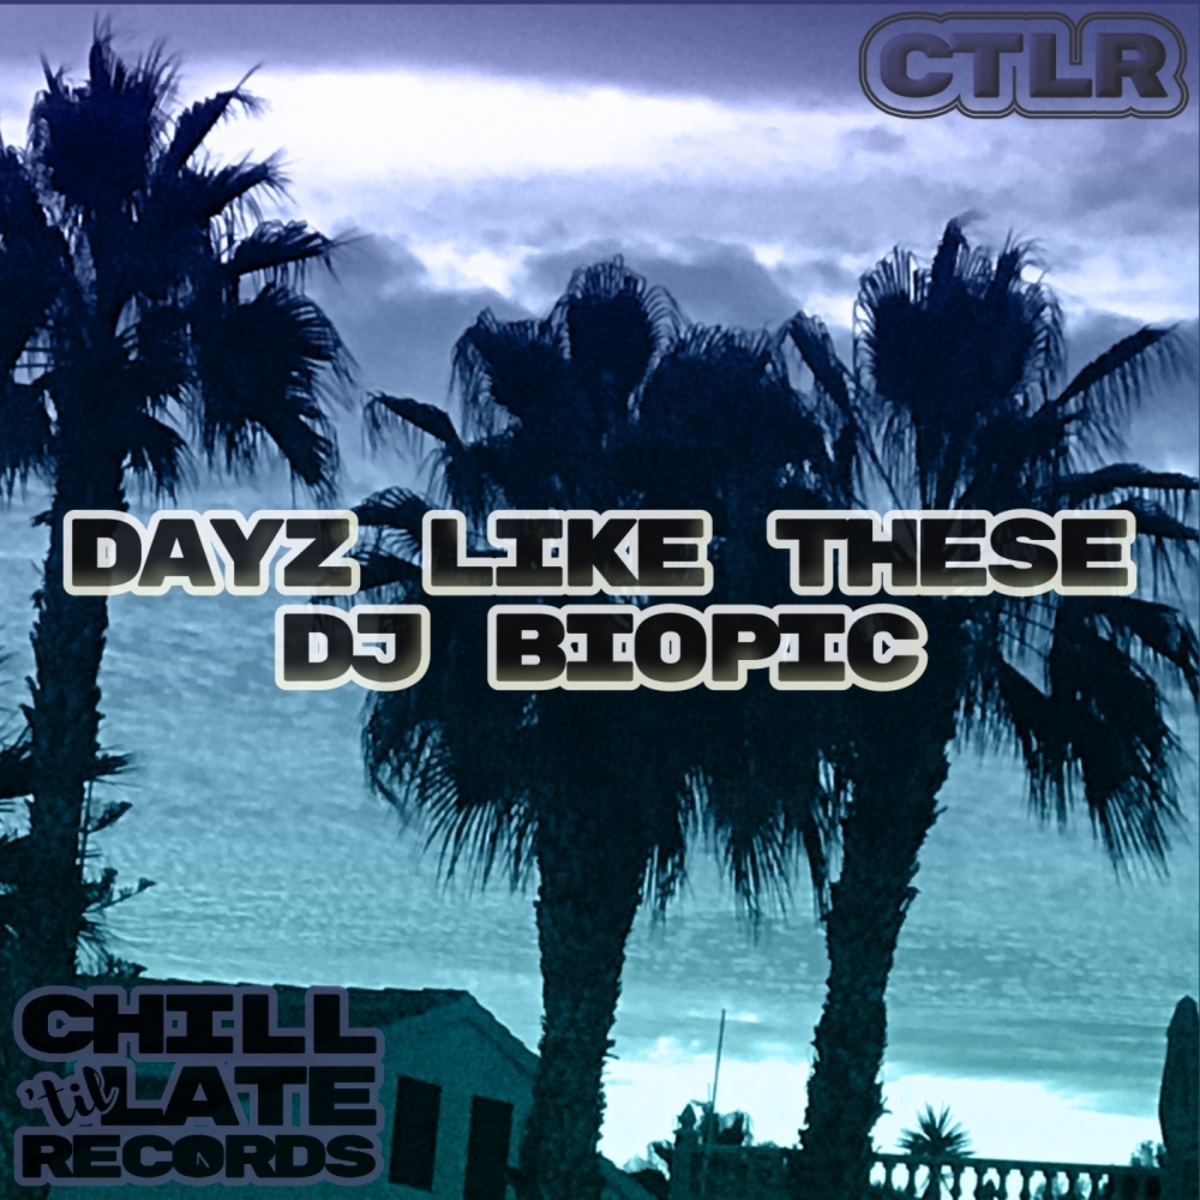 DJ Biopic - Dayz Like These / Chill 'Til Late Records